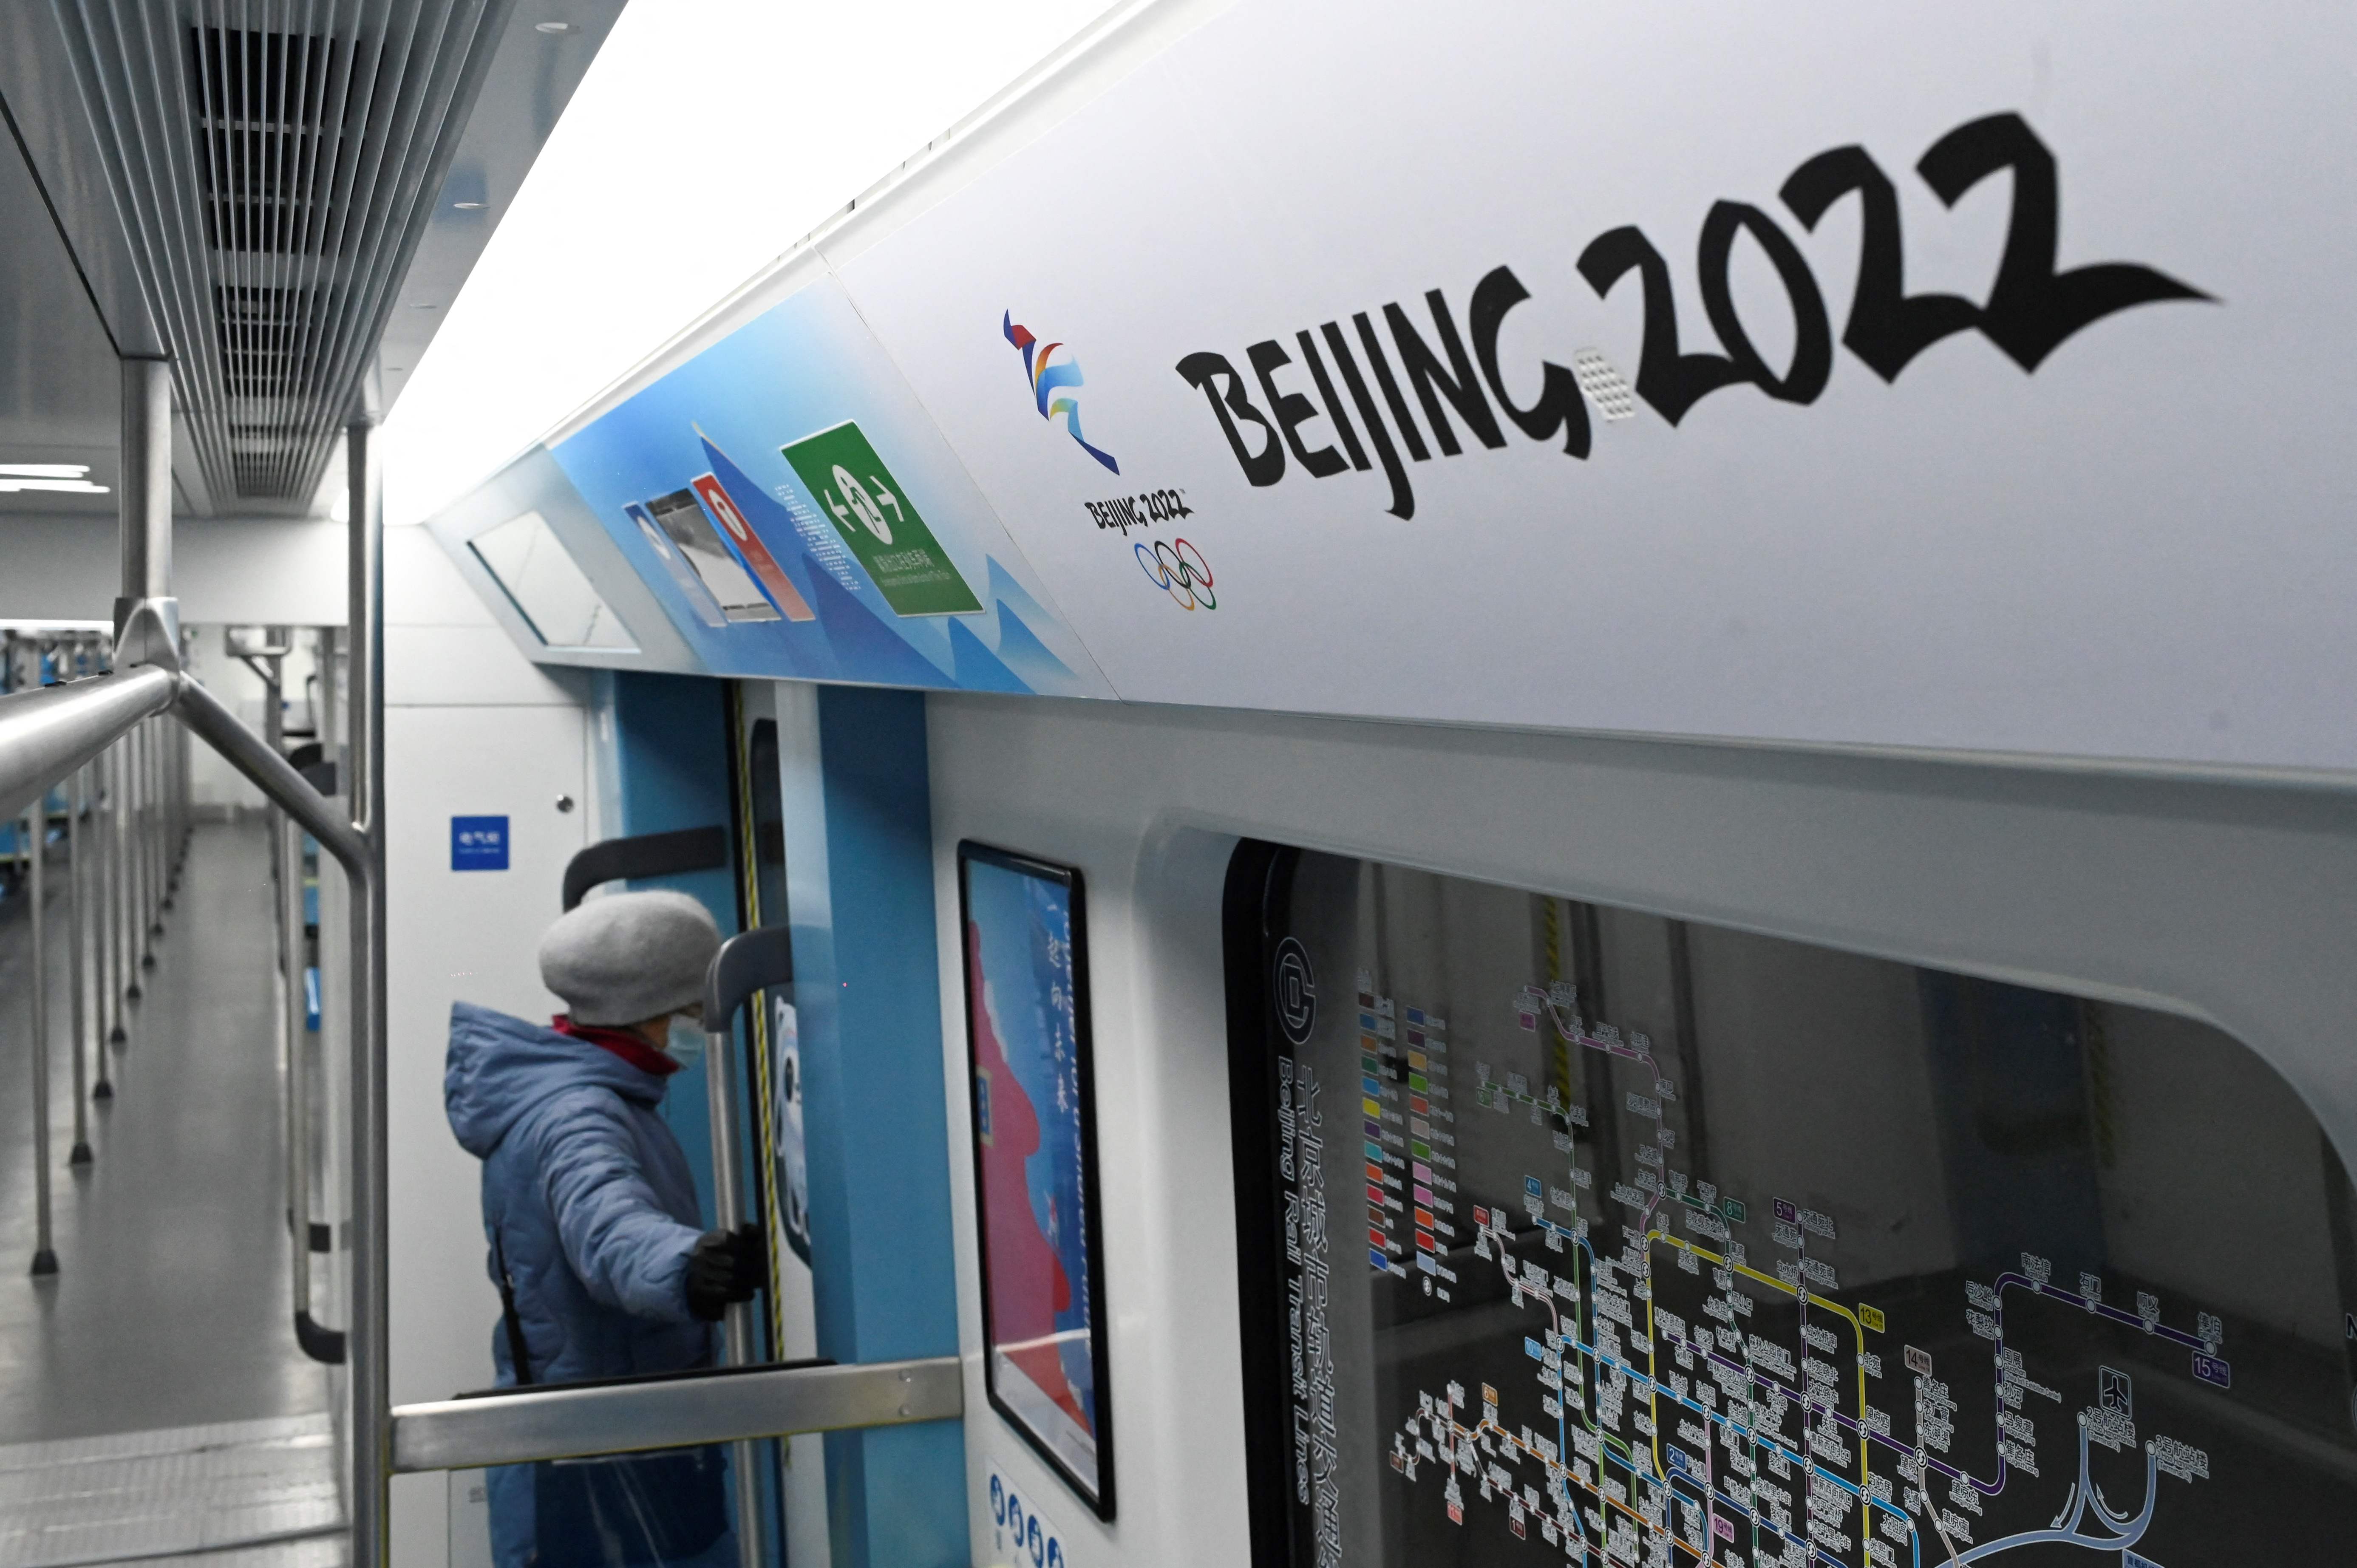 Signage for the 2022 Winter Olympic Games displayed on a subway train in Beijing